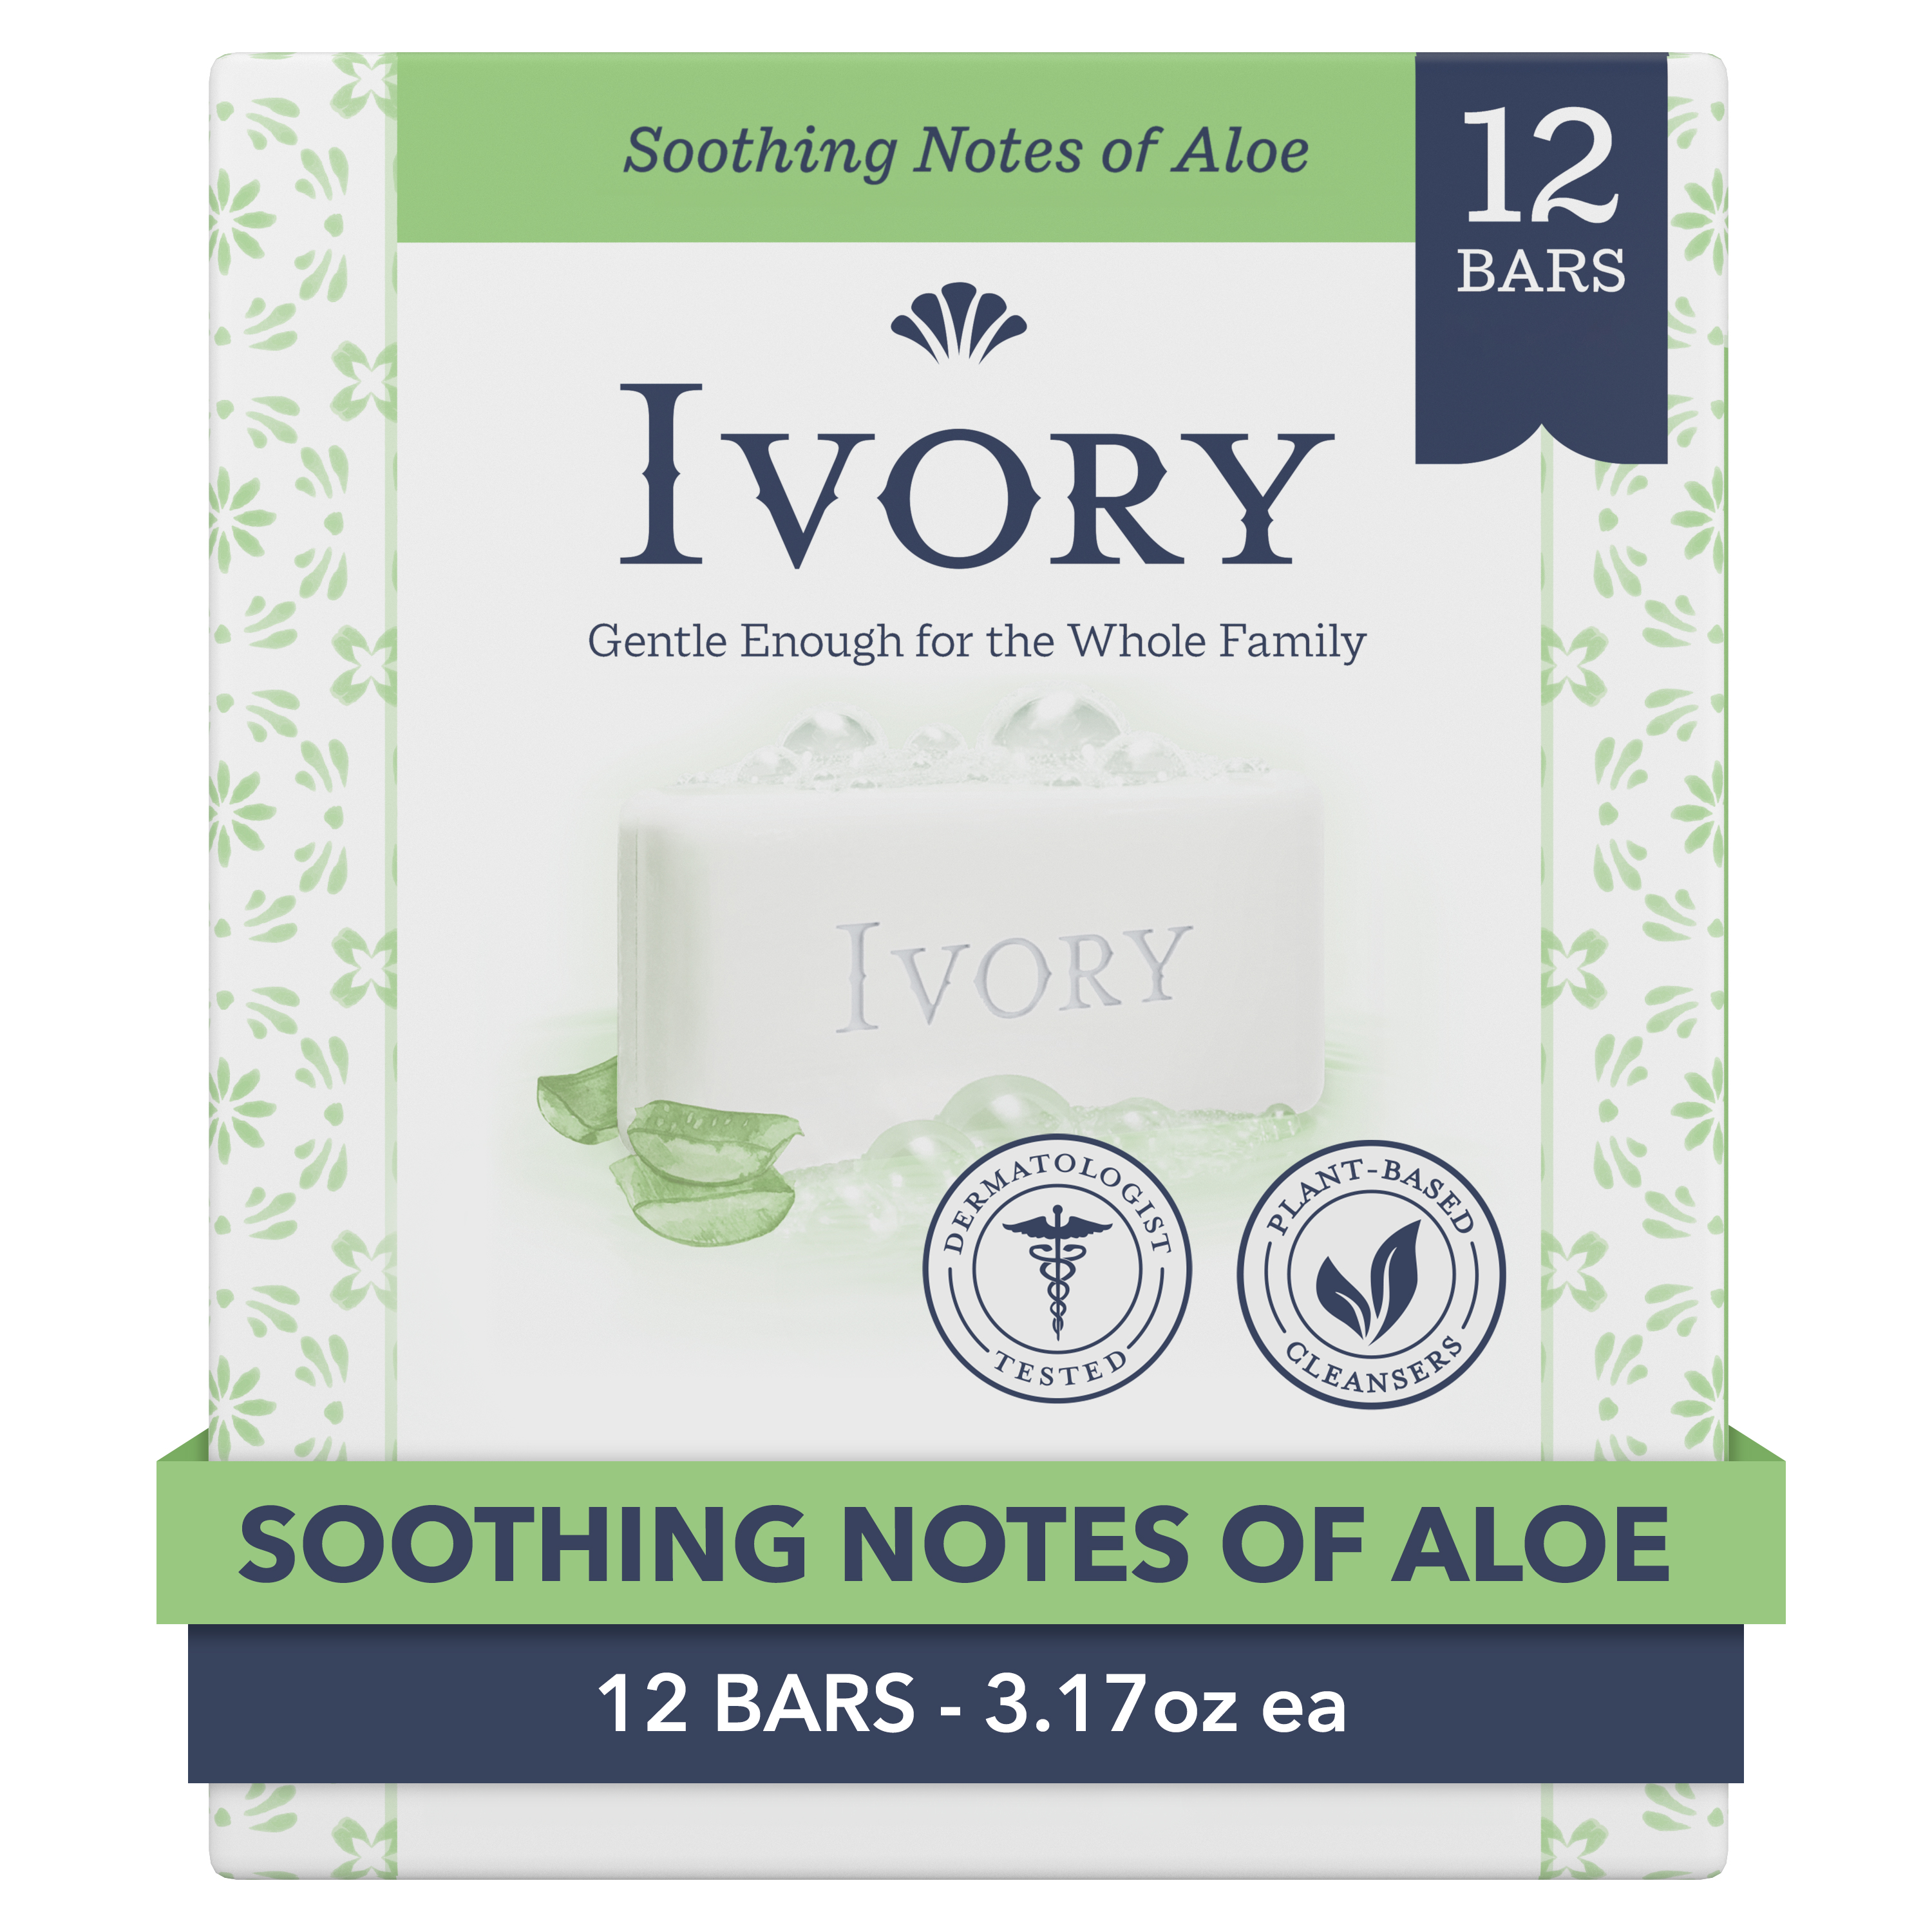 Ivory Bar Soap Notes of Aloe, for All Skin Types, 3.17 oz., 12 Count - image 1 of 8